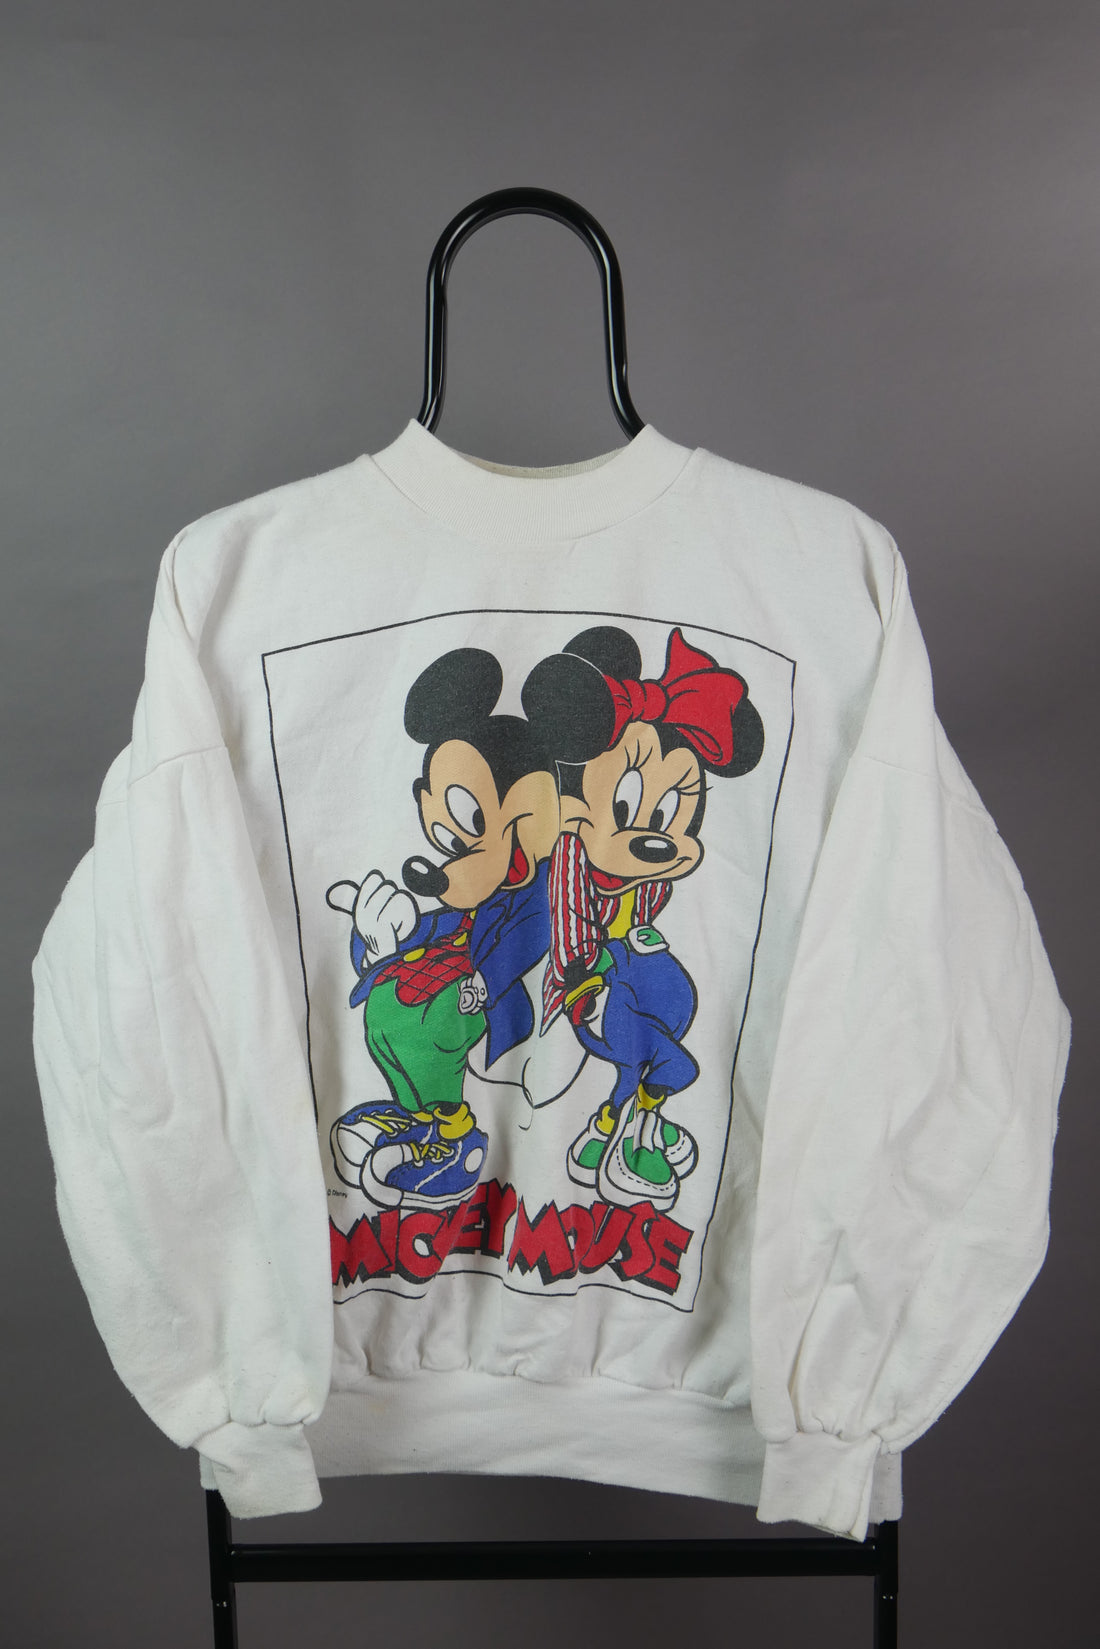 The Vintage Mickey Mouse Graphic Sweatshirt (M)